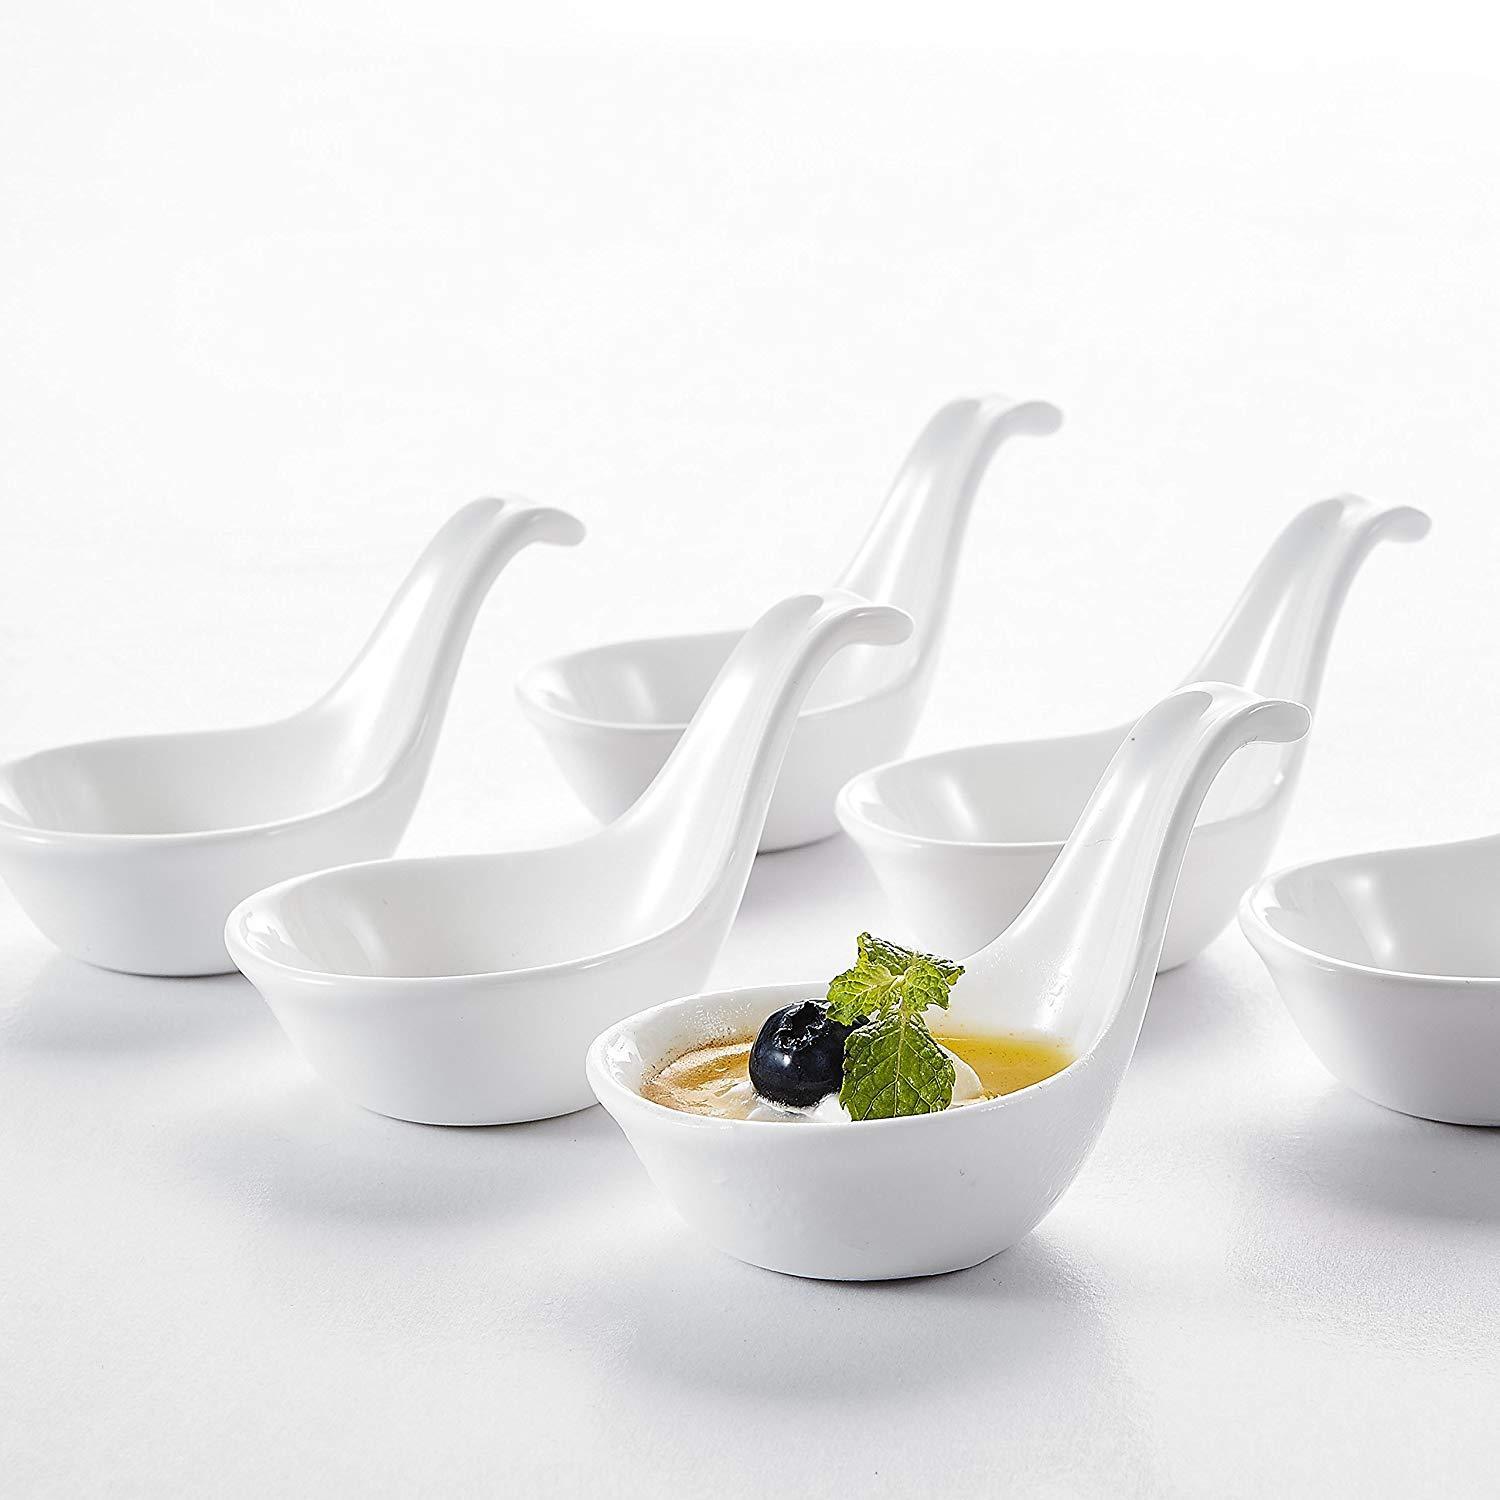 White Porcelain Set of 12 Ramekins (3.75") - Nordic Side - 12, 375, and, Baking, Bowl, Brulee, Cream, Creme, Cups, Dipping, Dishes, for, Ice, MALACASA, of, Porcelain, Ramekins, Set, Snack, So